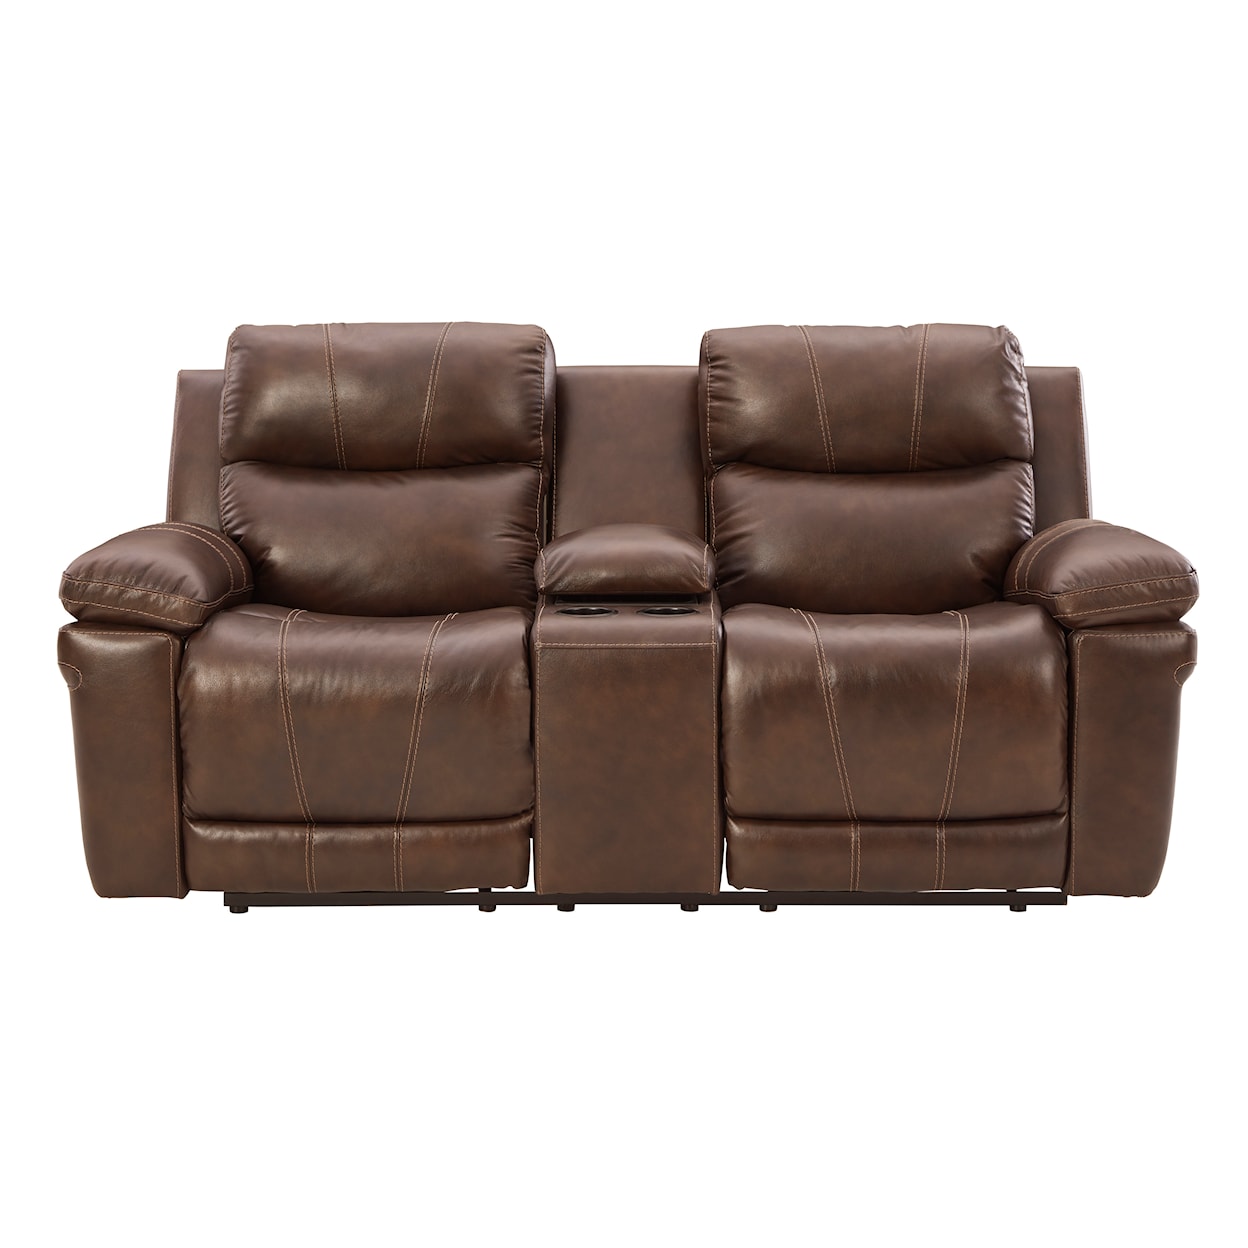 Ashley Furniture Signature Design Edmar Power Reclining Loveseat with Console